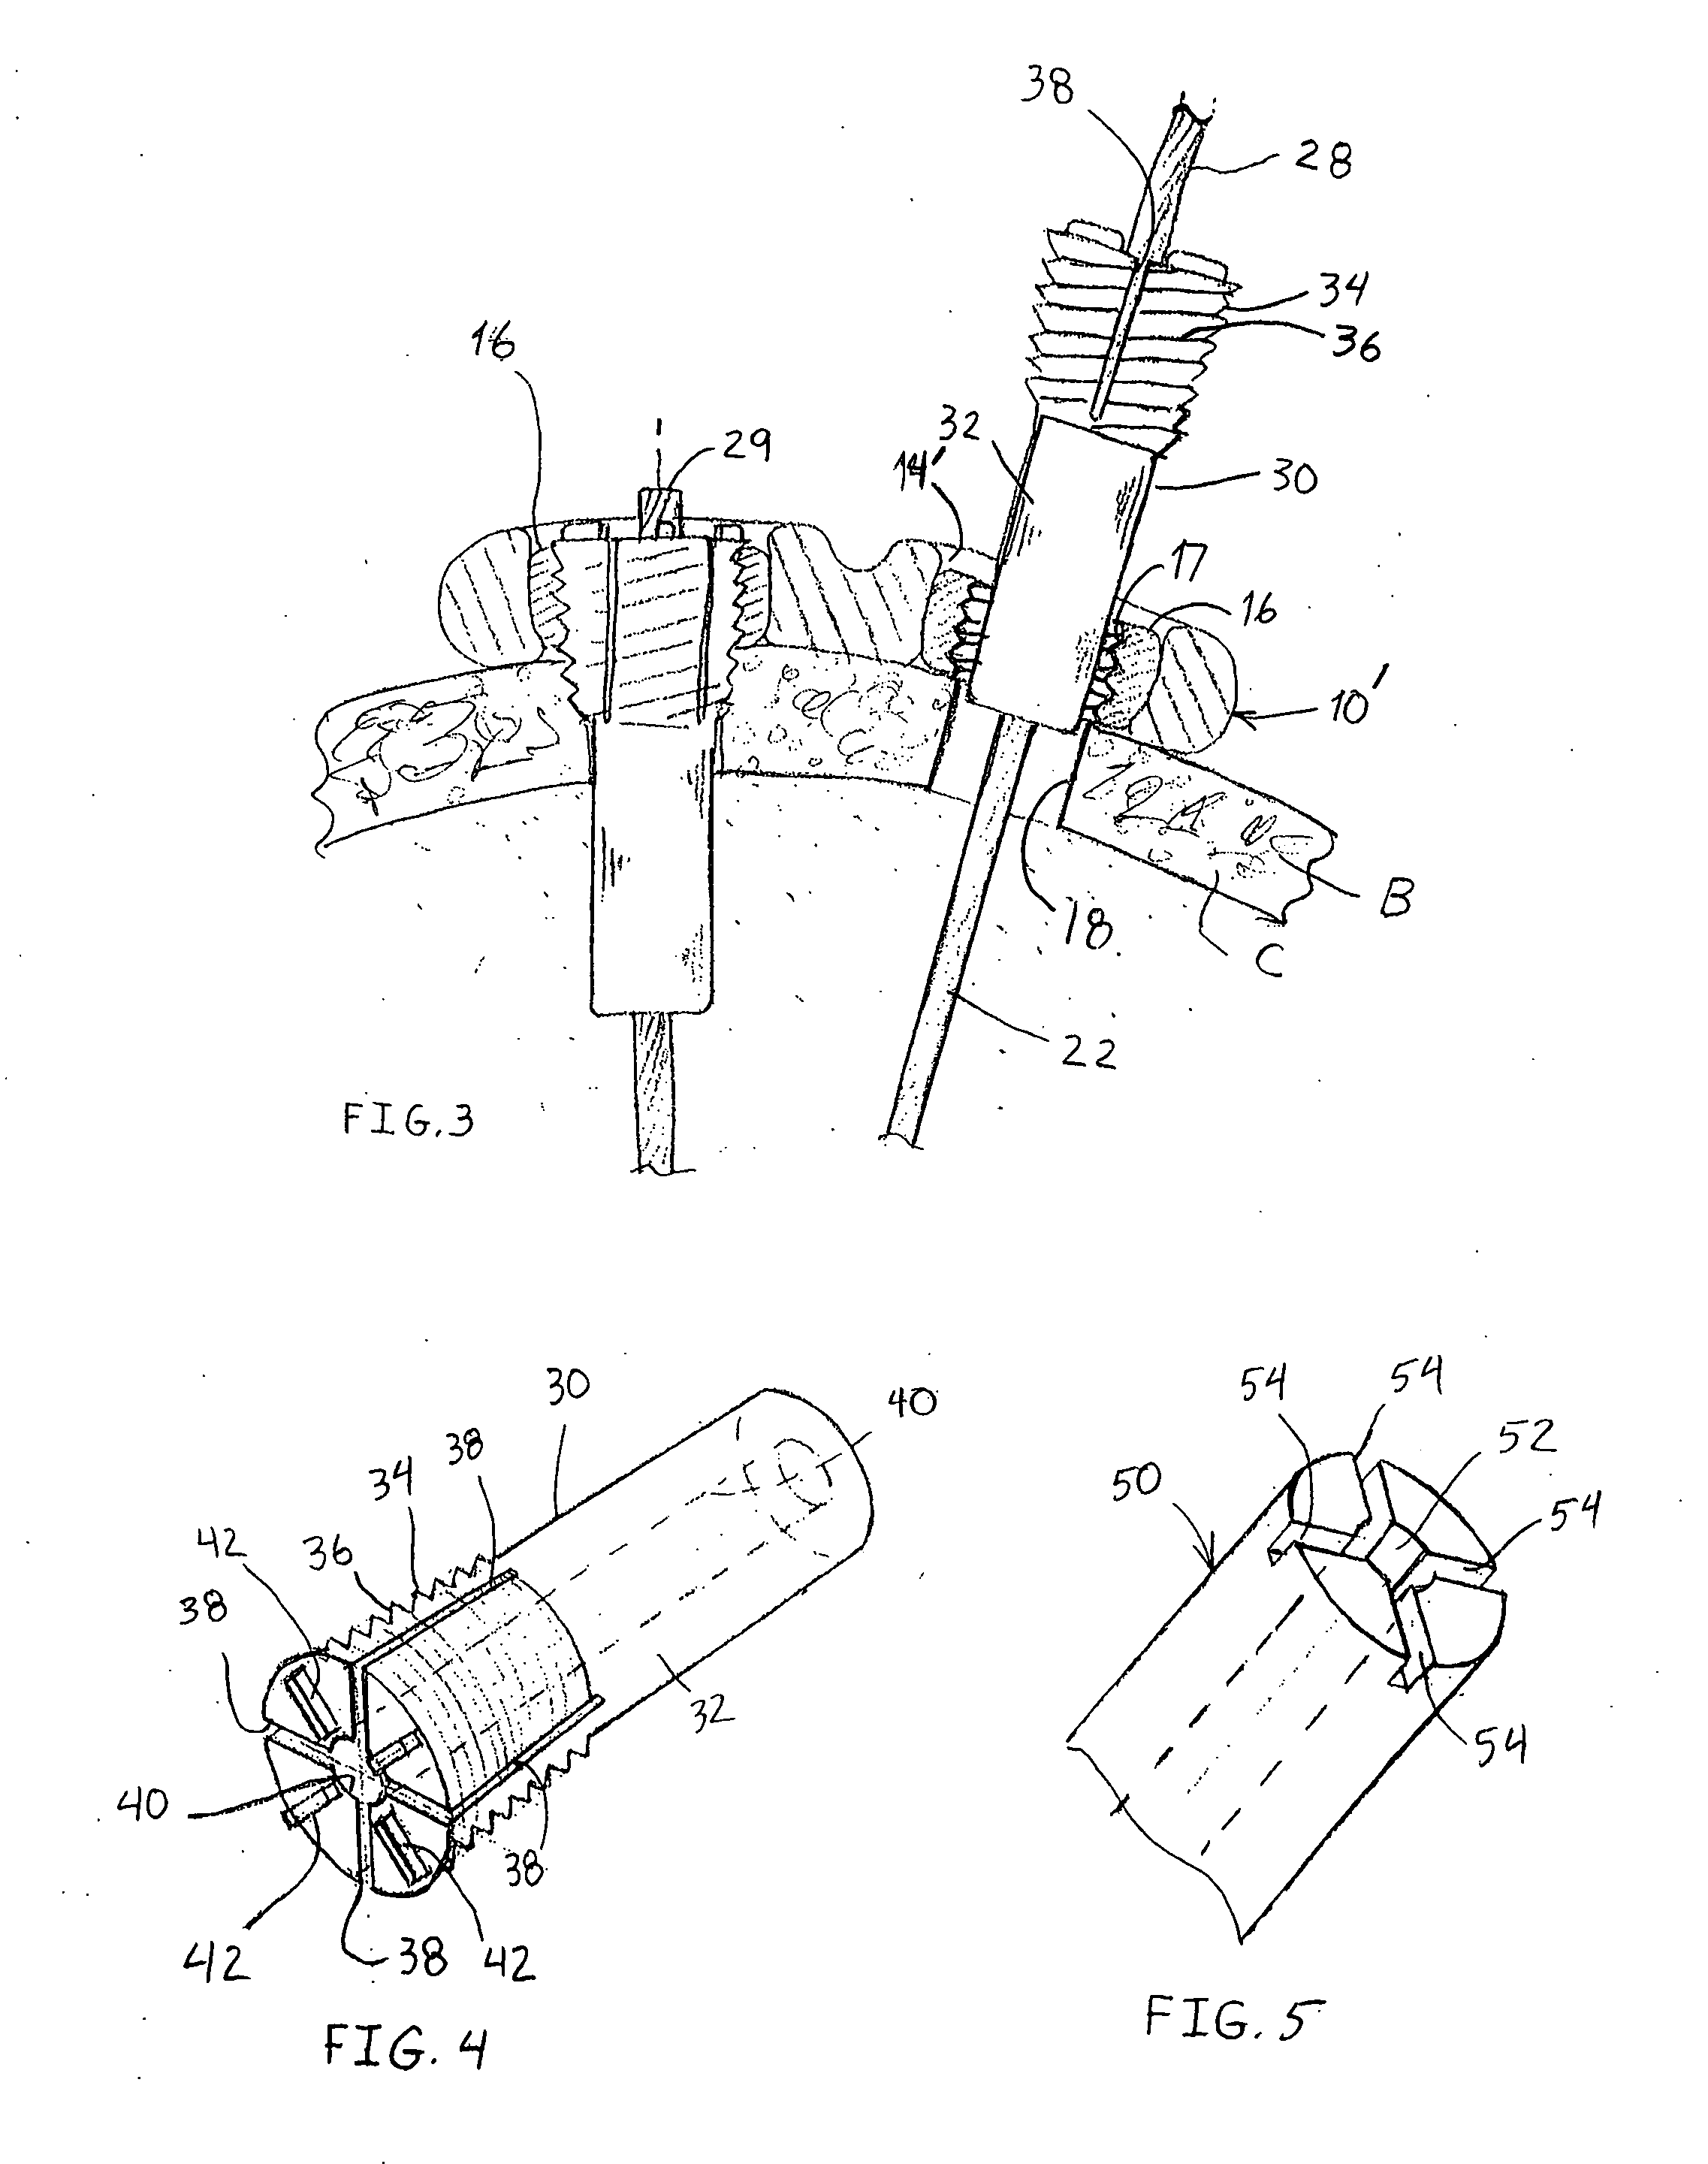 Fastening system for internal fixation